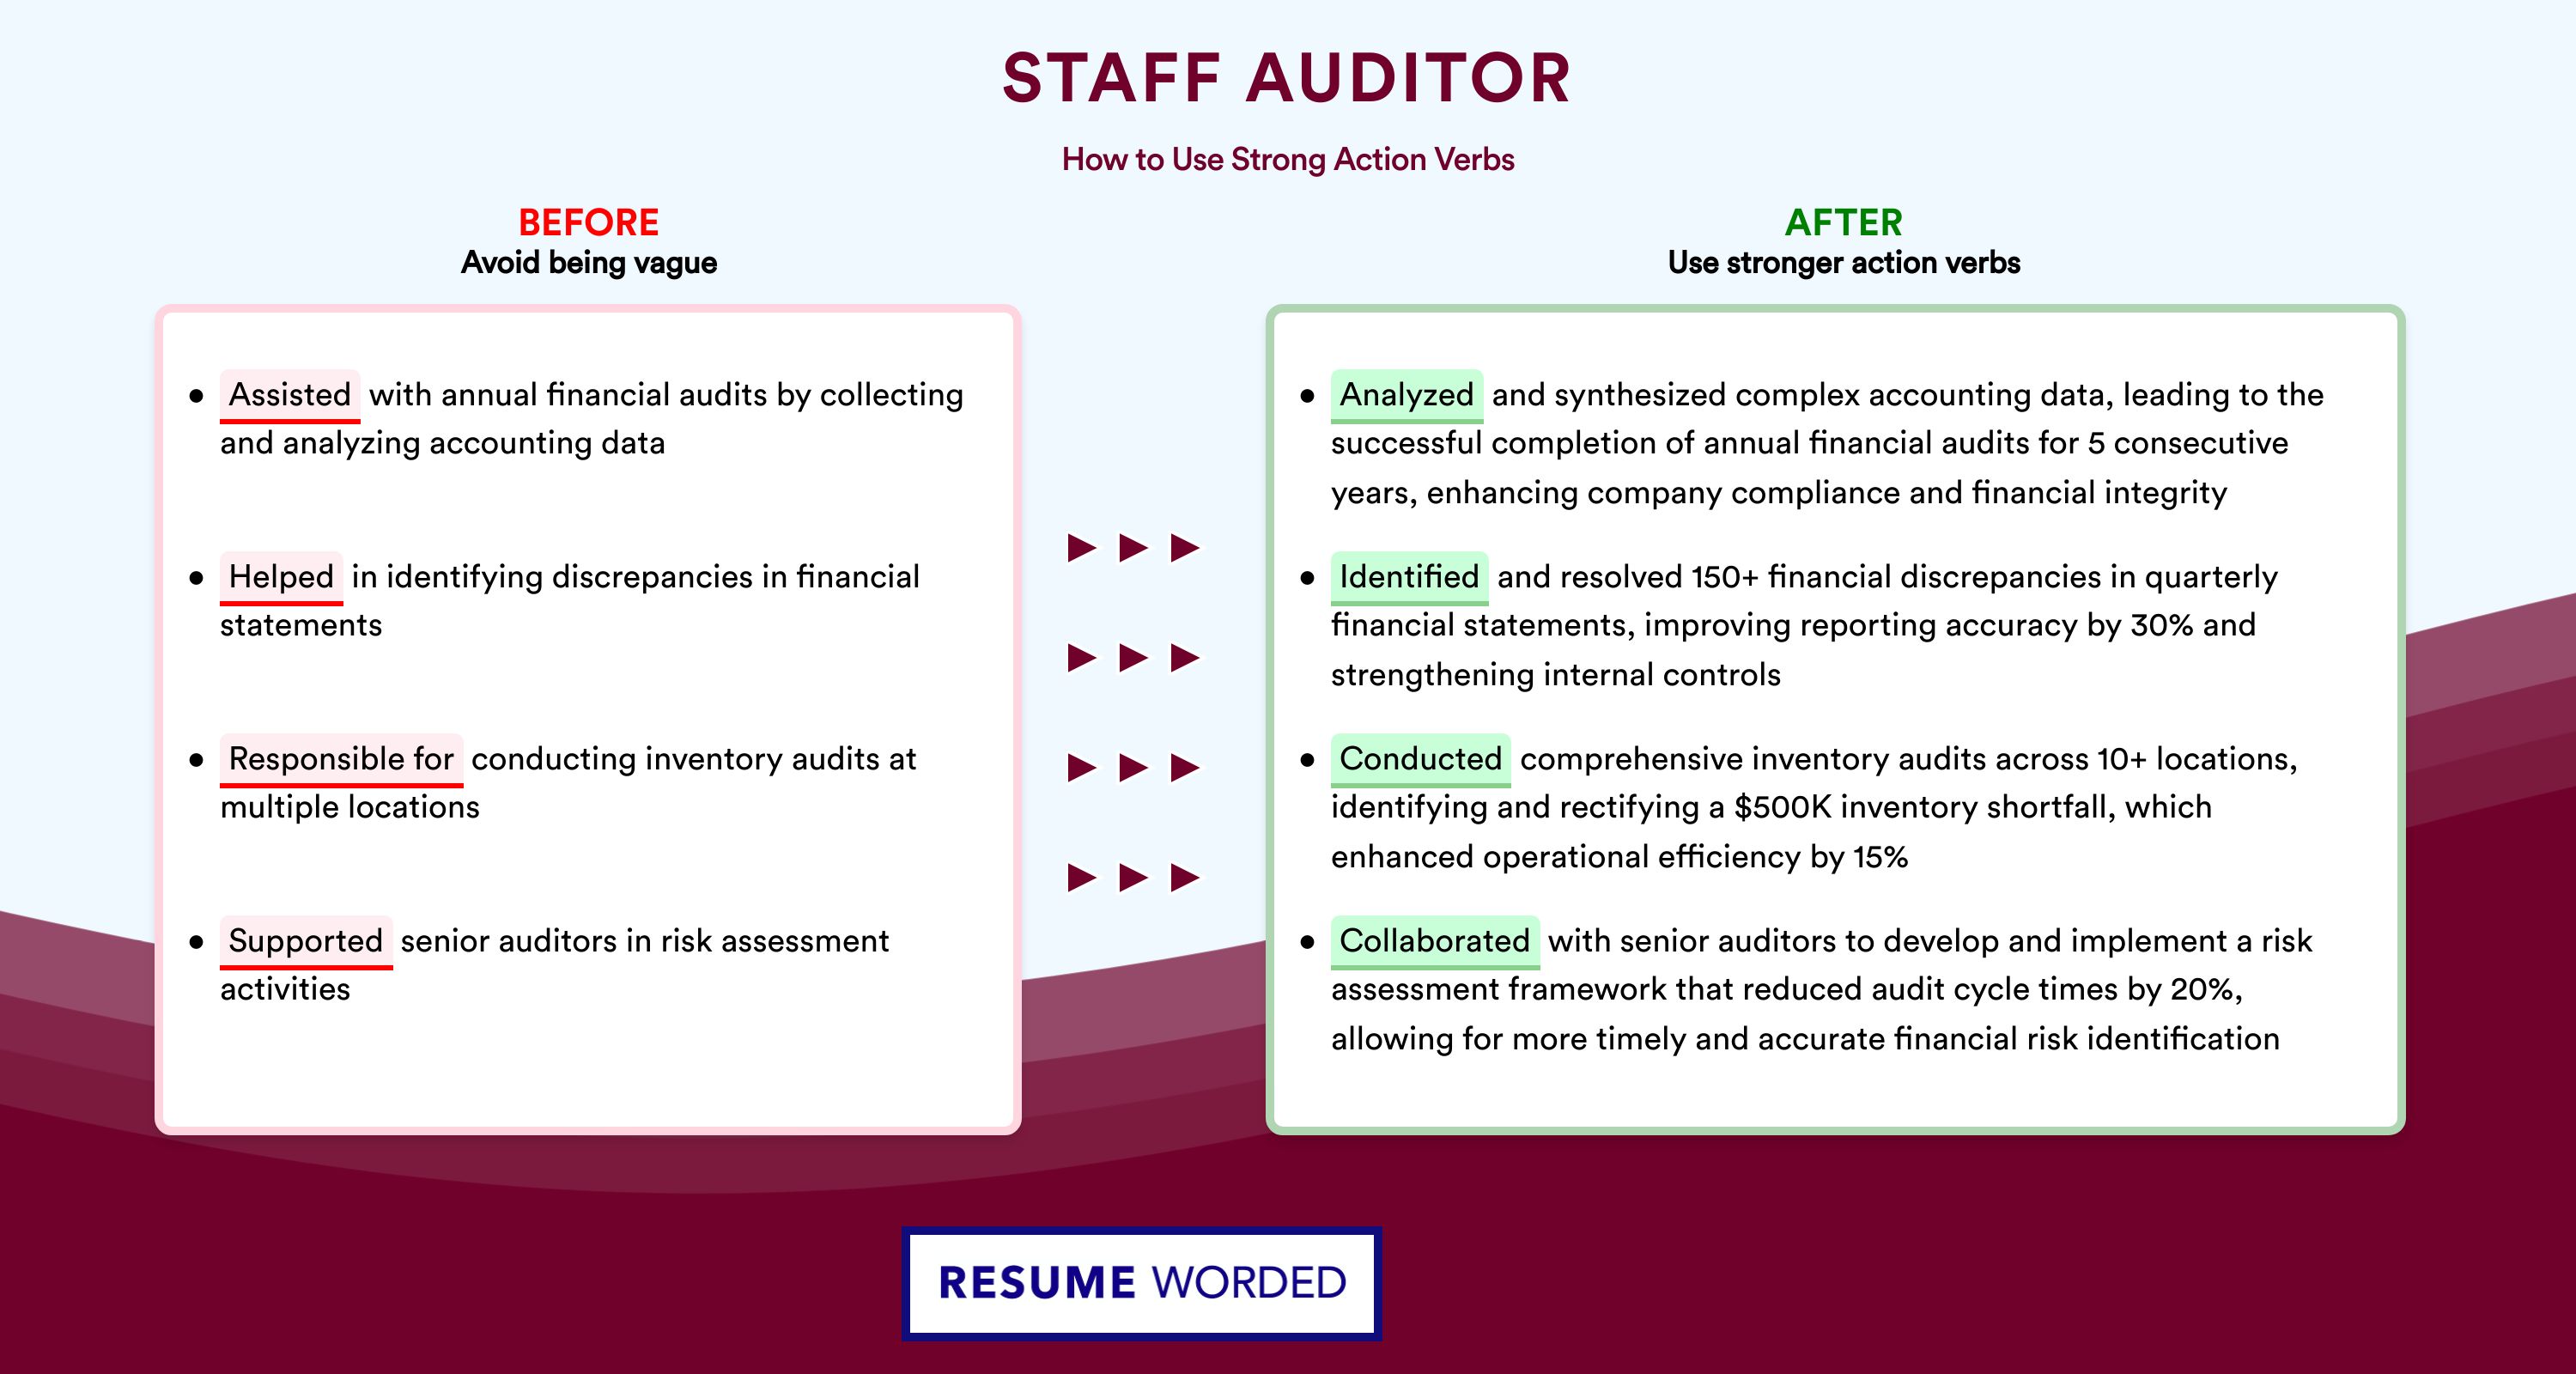 Action Verbs for Staff Auditor